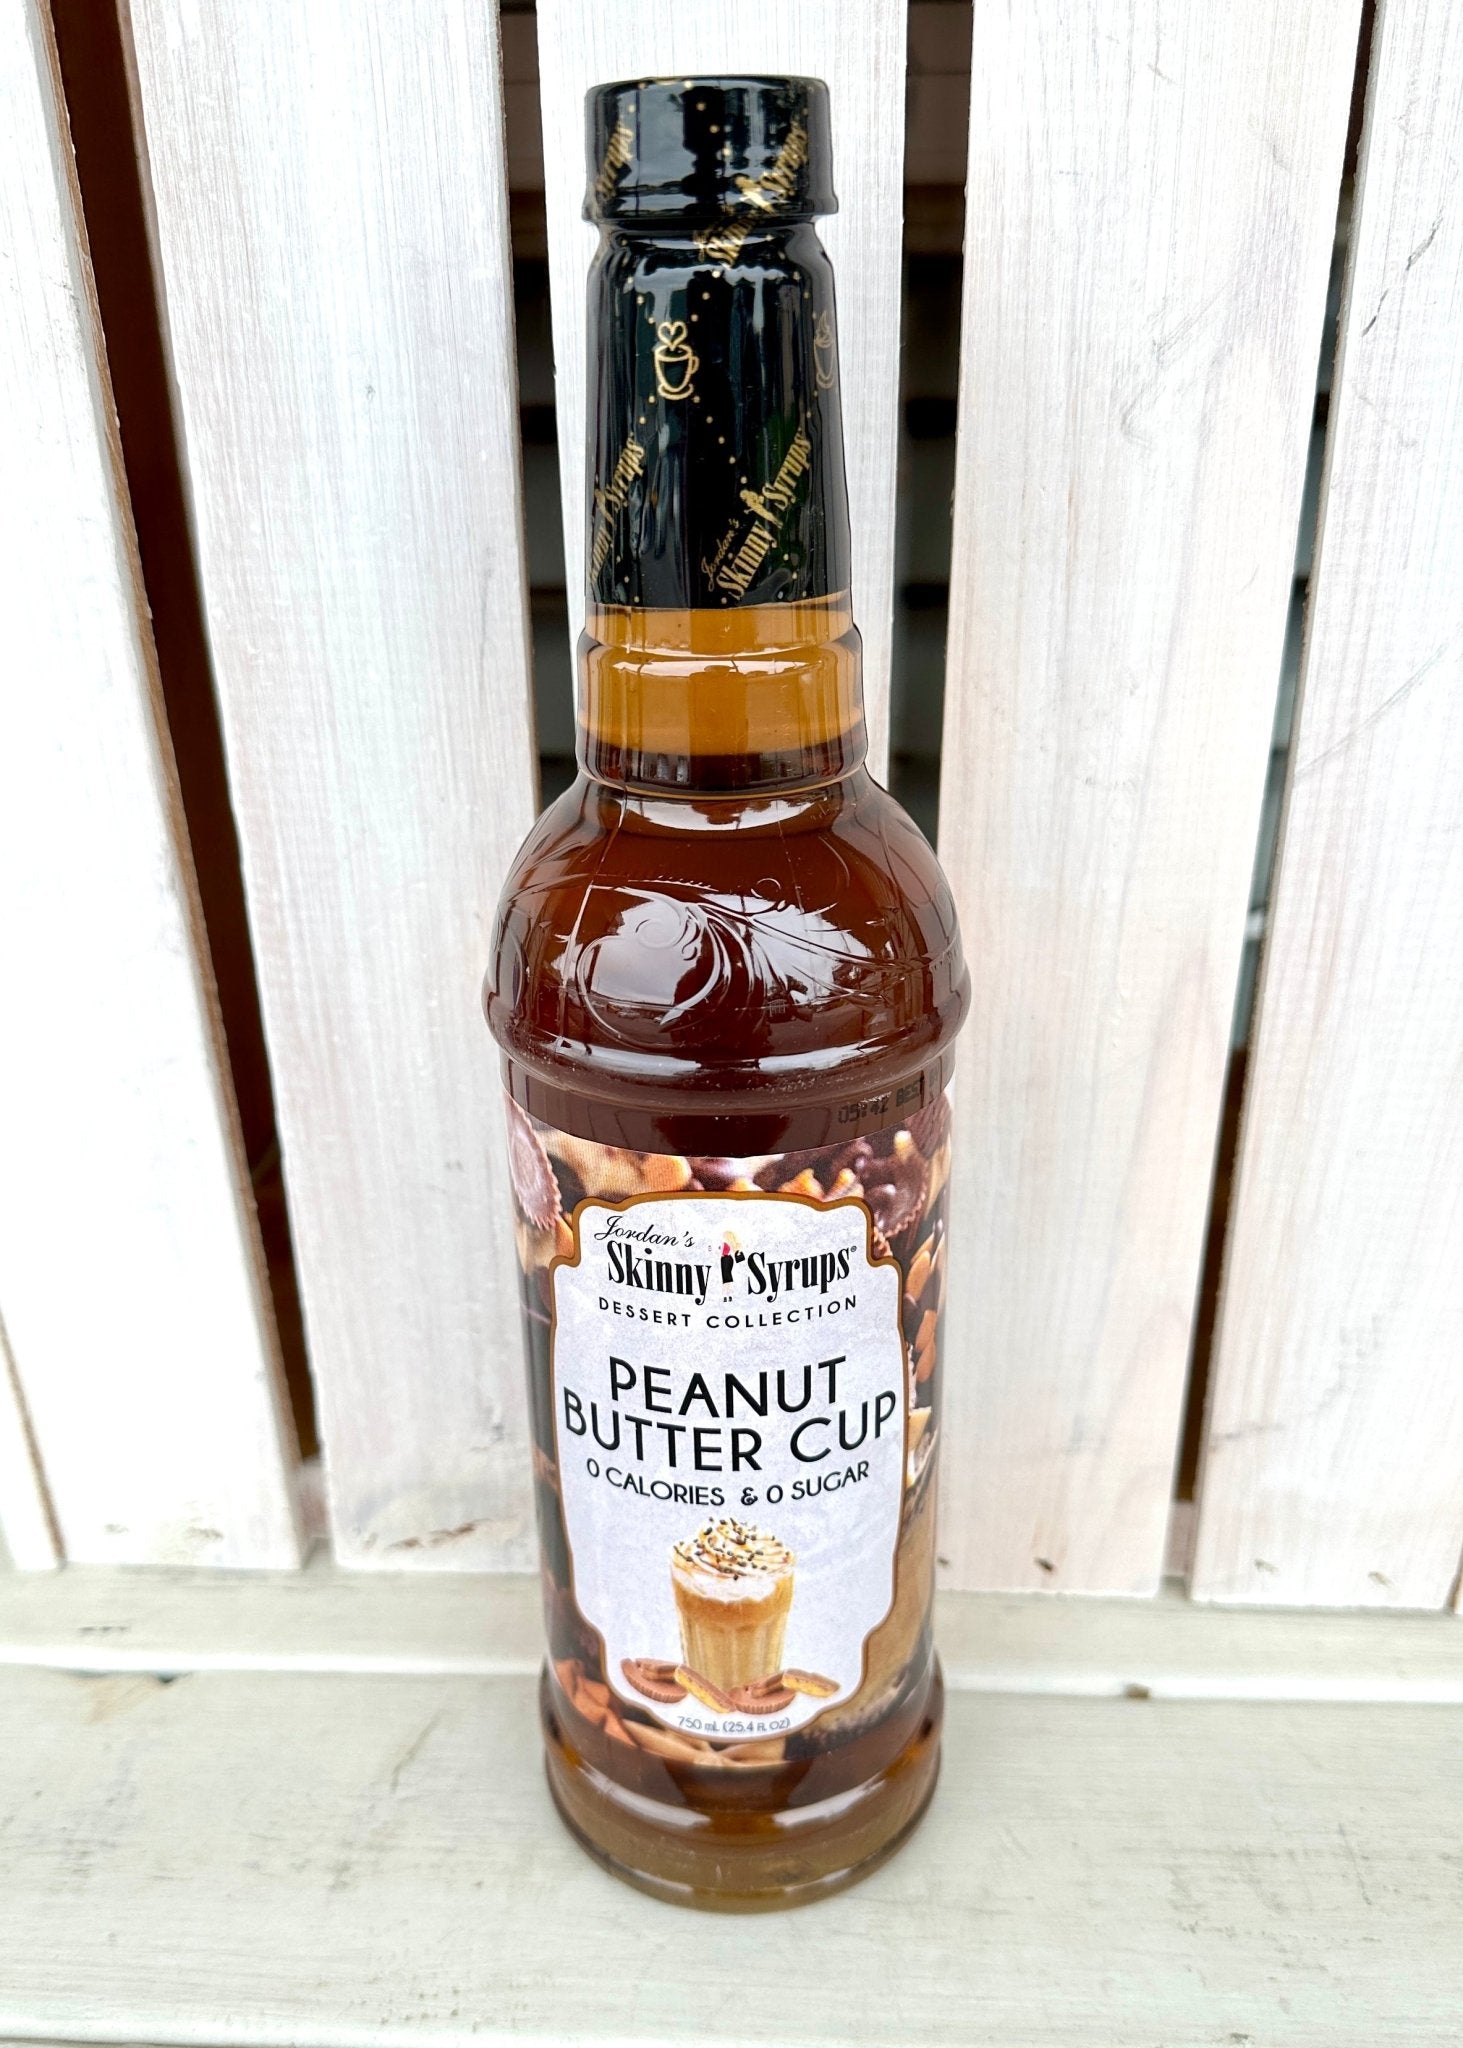 Sugar Free Peanut Butter Cup Syrup - Skinny Syrups - 25.4/750ml - Skinny Syrups - Jimberly's Boutique